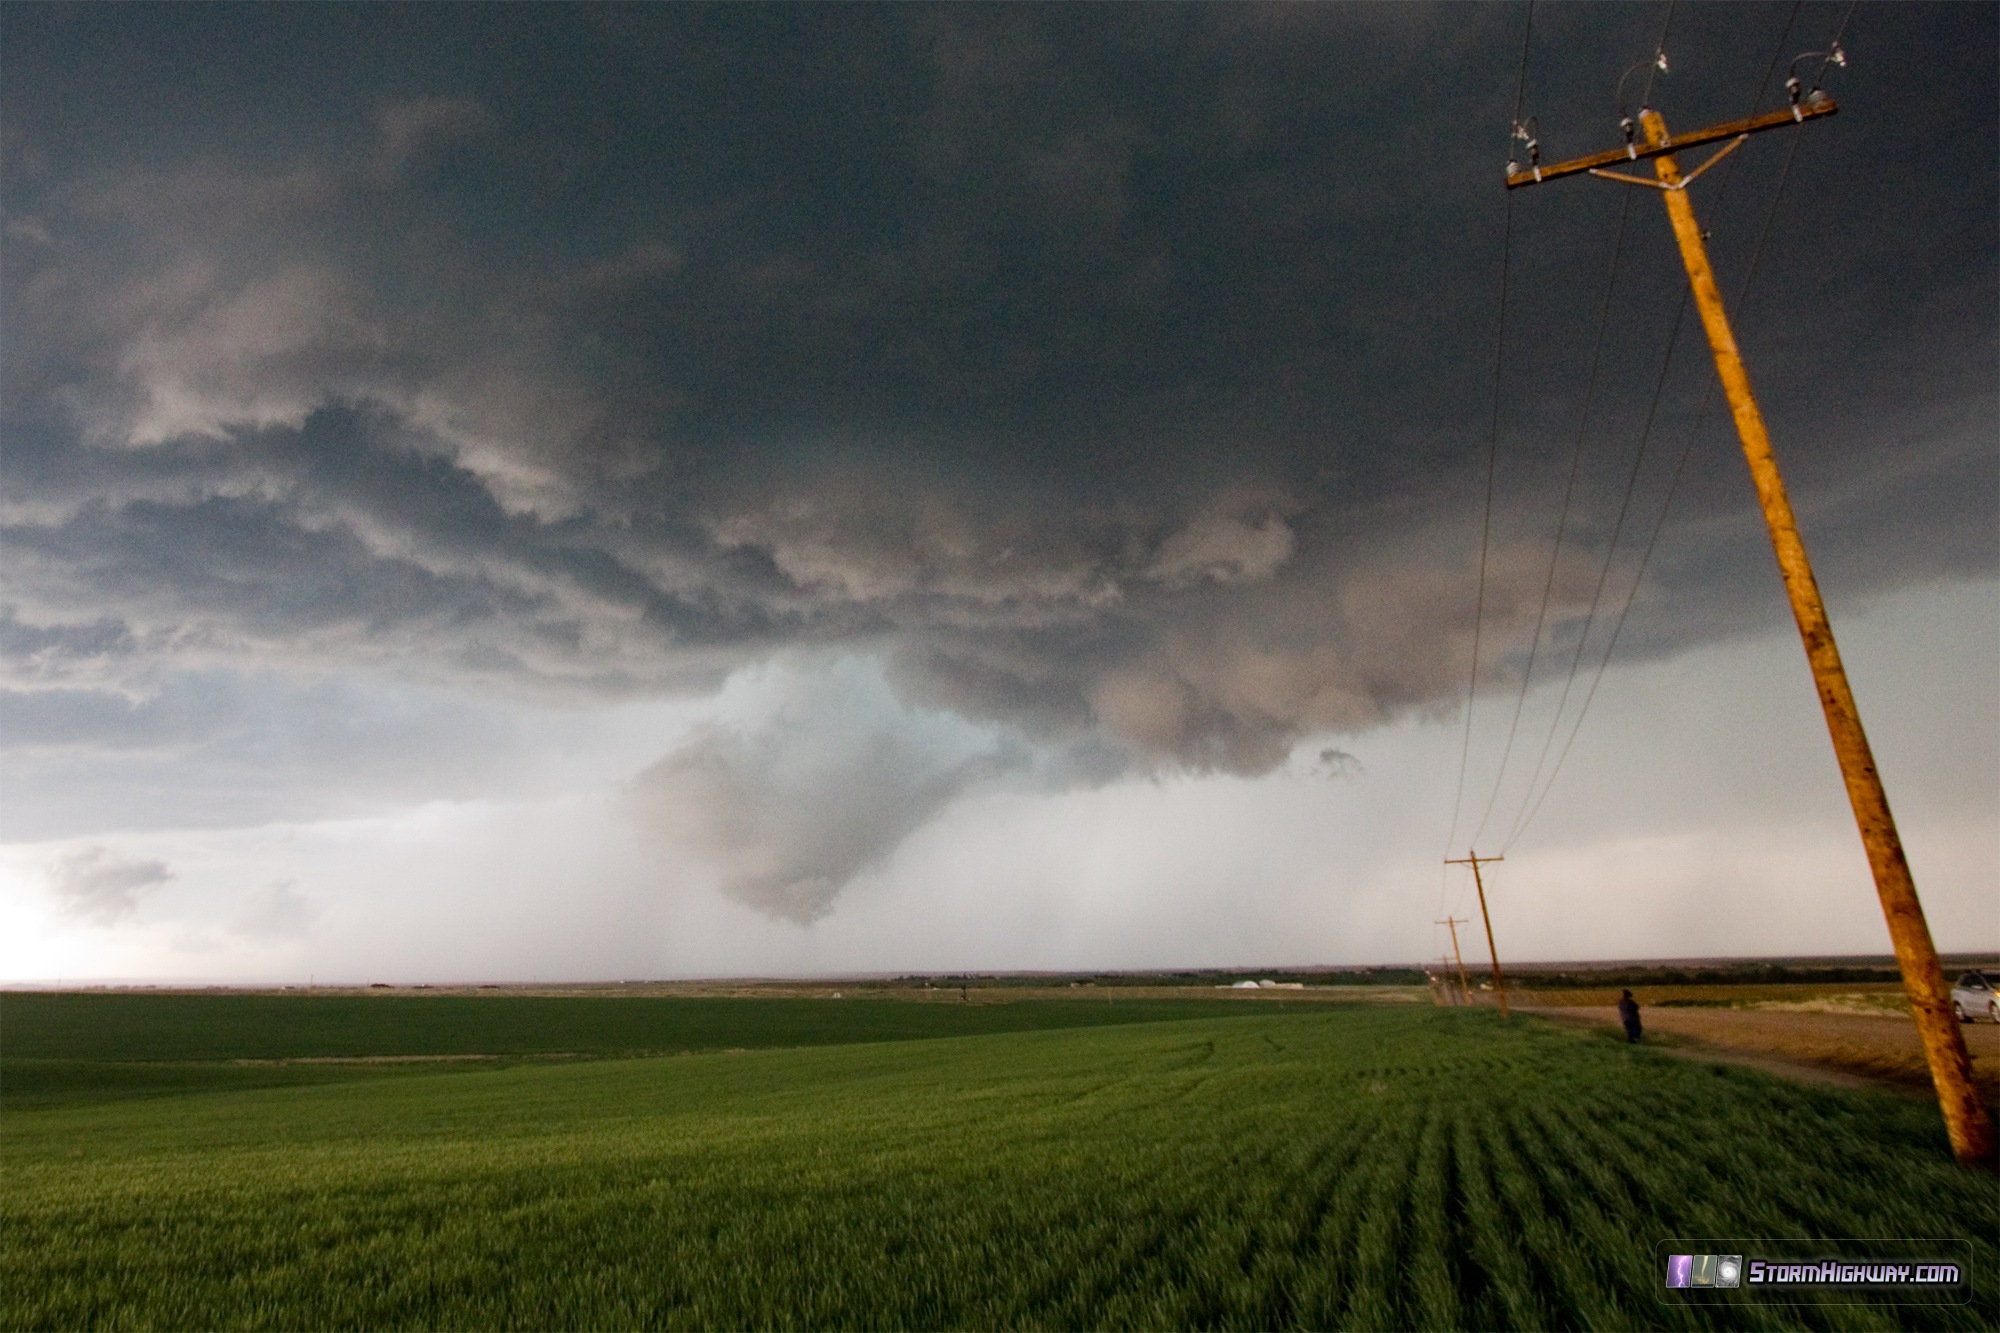 Supercell near Byers, Colorado - May 21, 2014